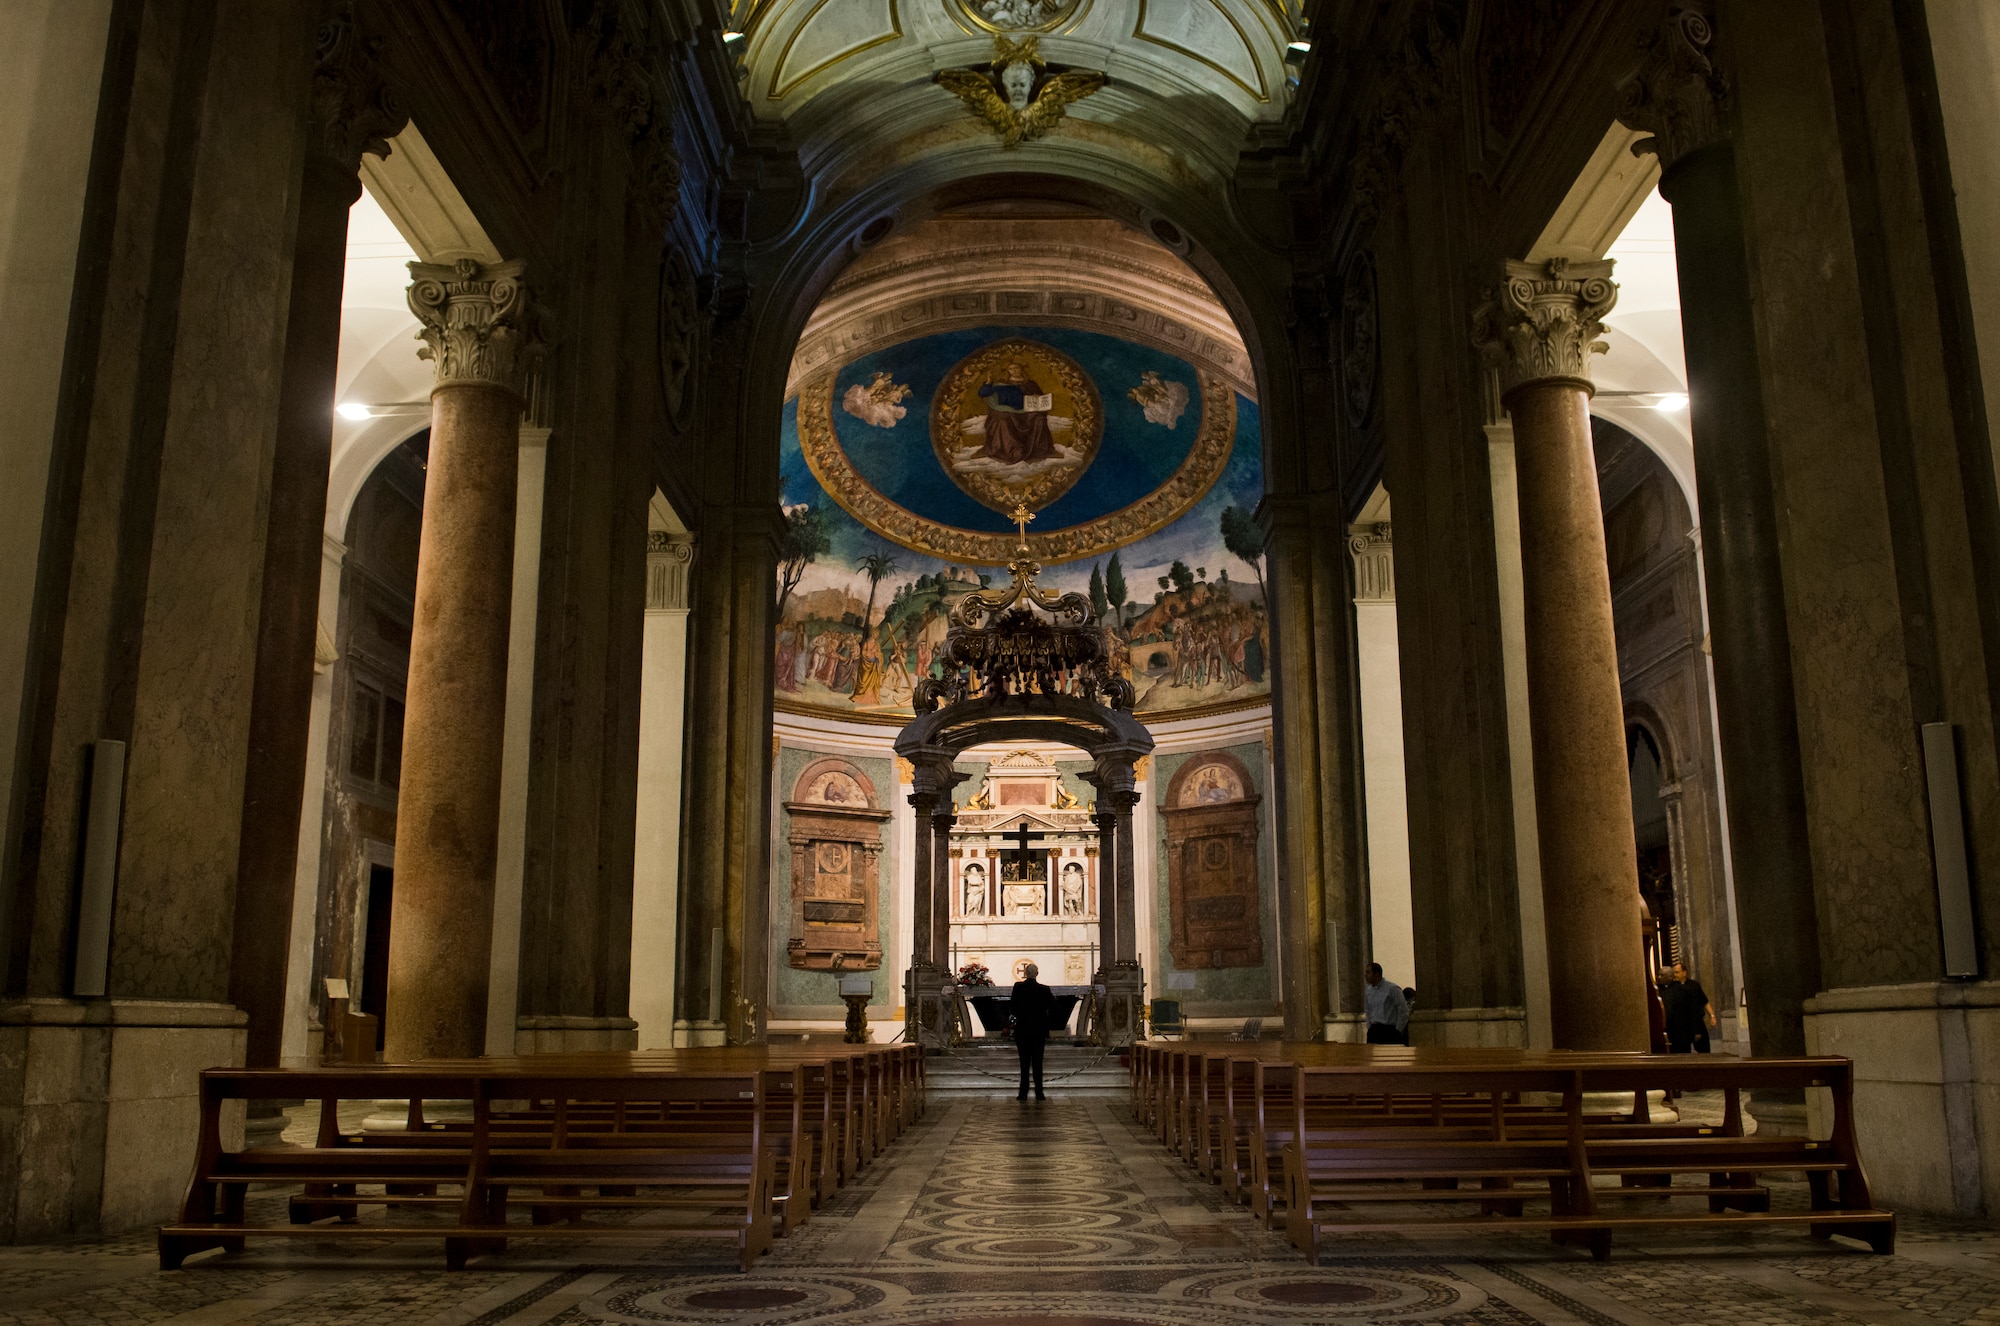 The Basilica of the Santa Croce in Gerusalemme in Rome was consecrated around 325. Santa Croce is one of The Seven Pilgrim Churches of Rome. (U.S. Air Force photo/Staff Sgt. Andrew Lee)